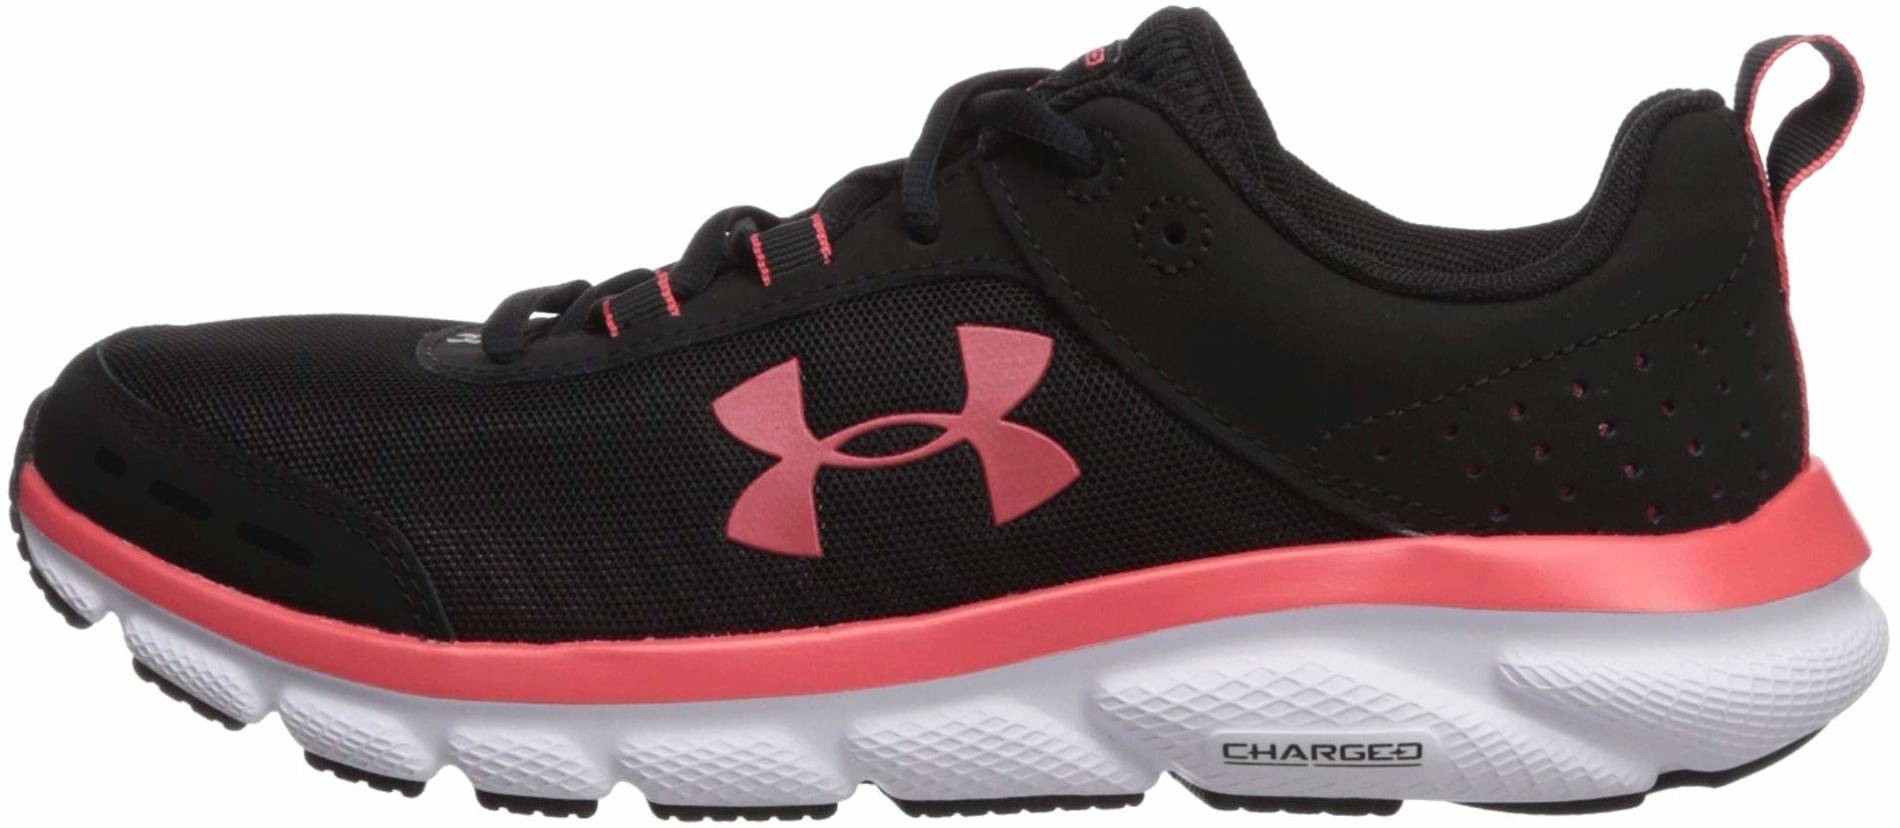 Review of Under Armour Charged Assert 8 